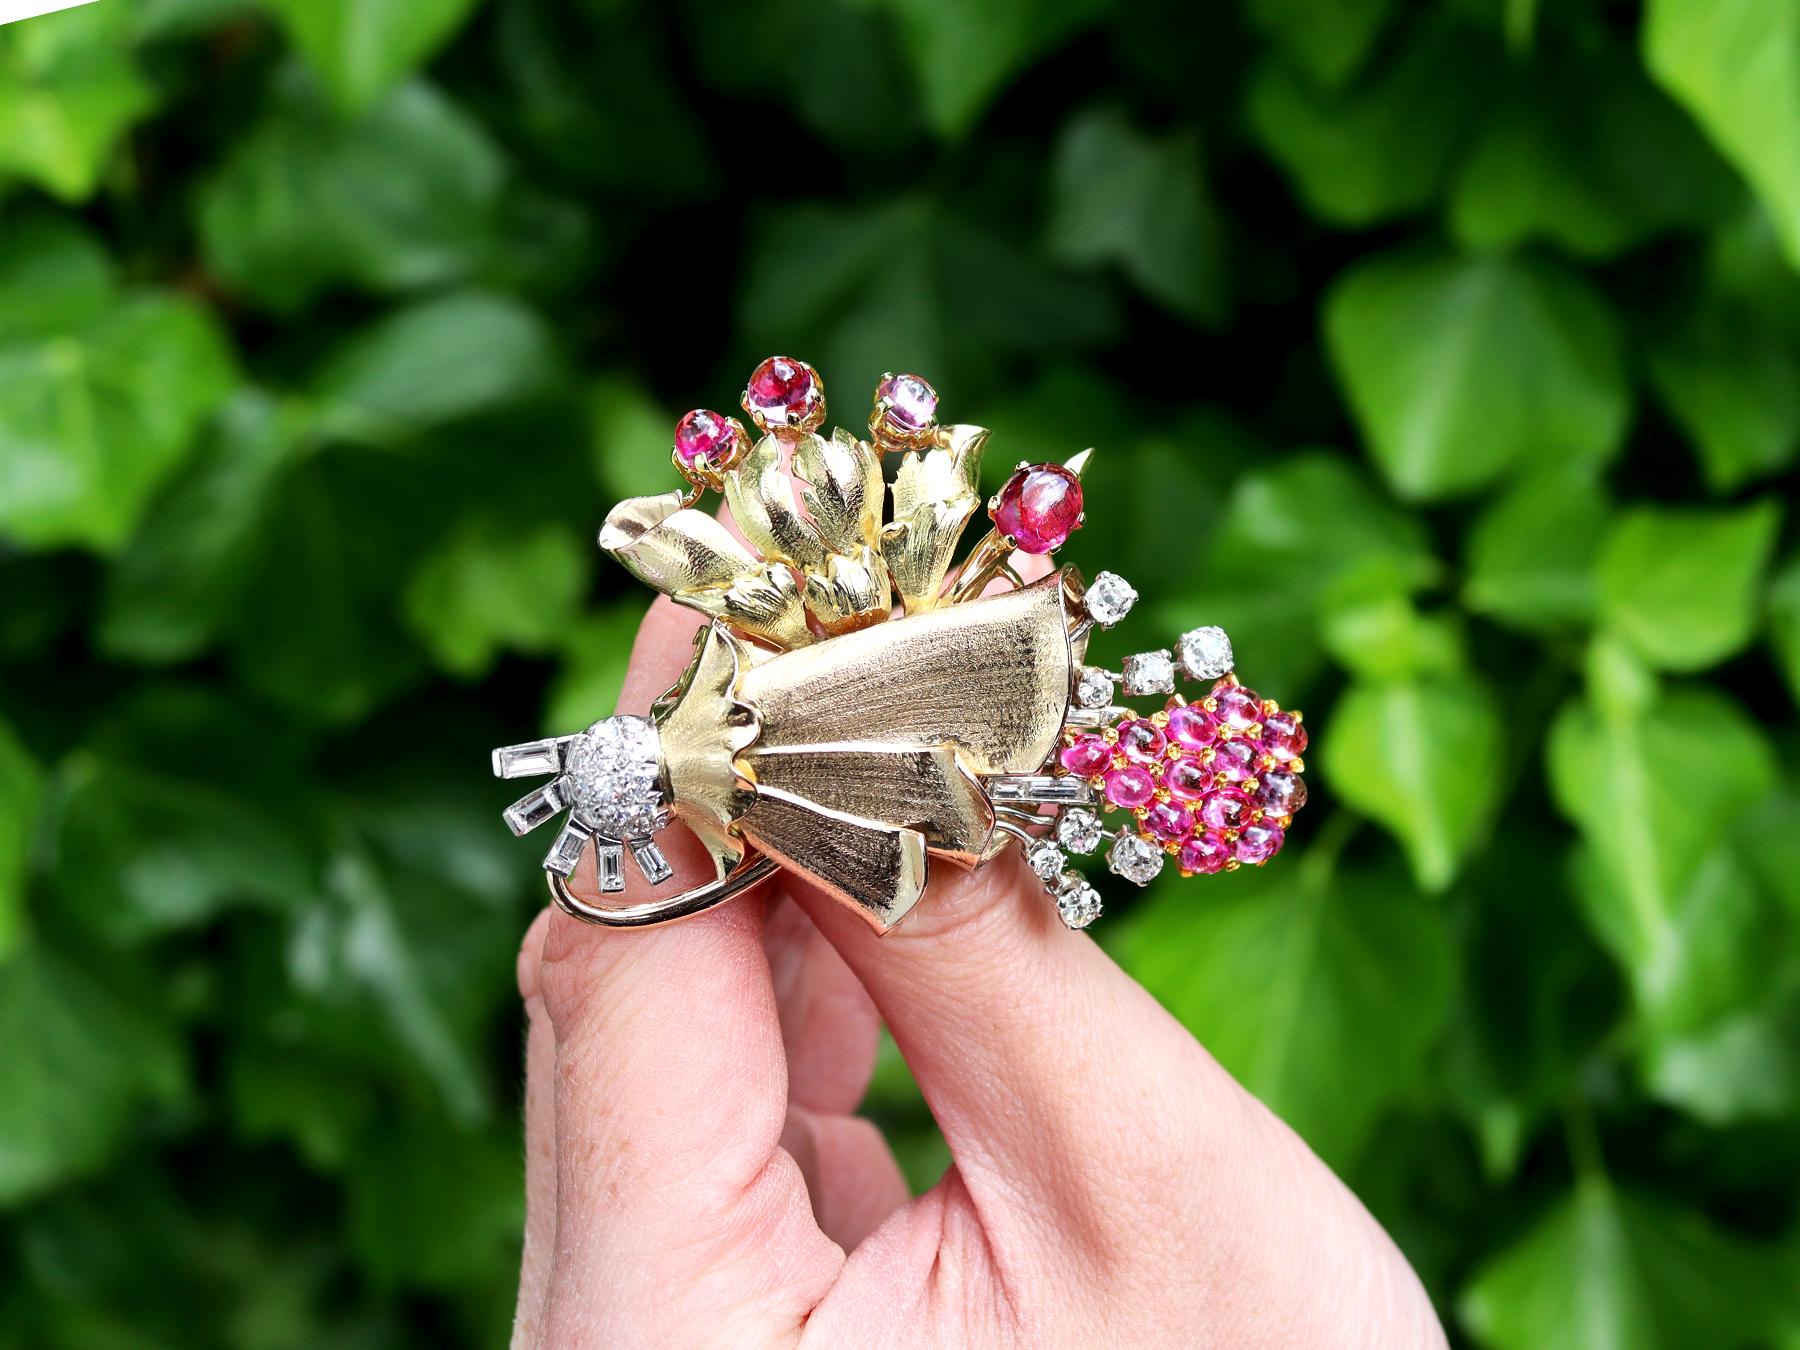 A stunning, fine and impressive 4.83 carat pink sapphire and 1.10 carat tourmaline, 1.36 carat diamond, 18 carat yellow and rose gold, platinum set brooch; part of our diverse vintage brooch collections.

This stunning, fine and impressive vintage